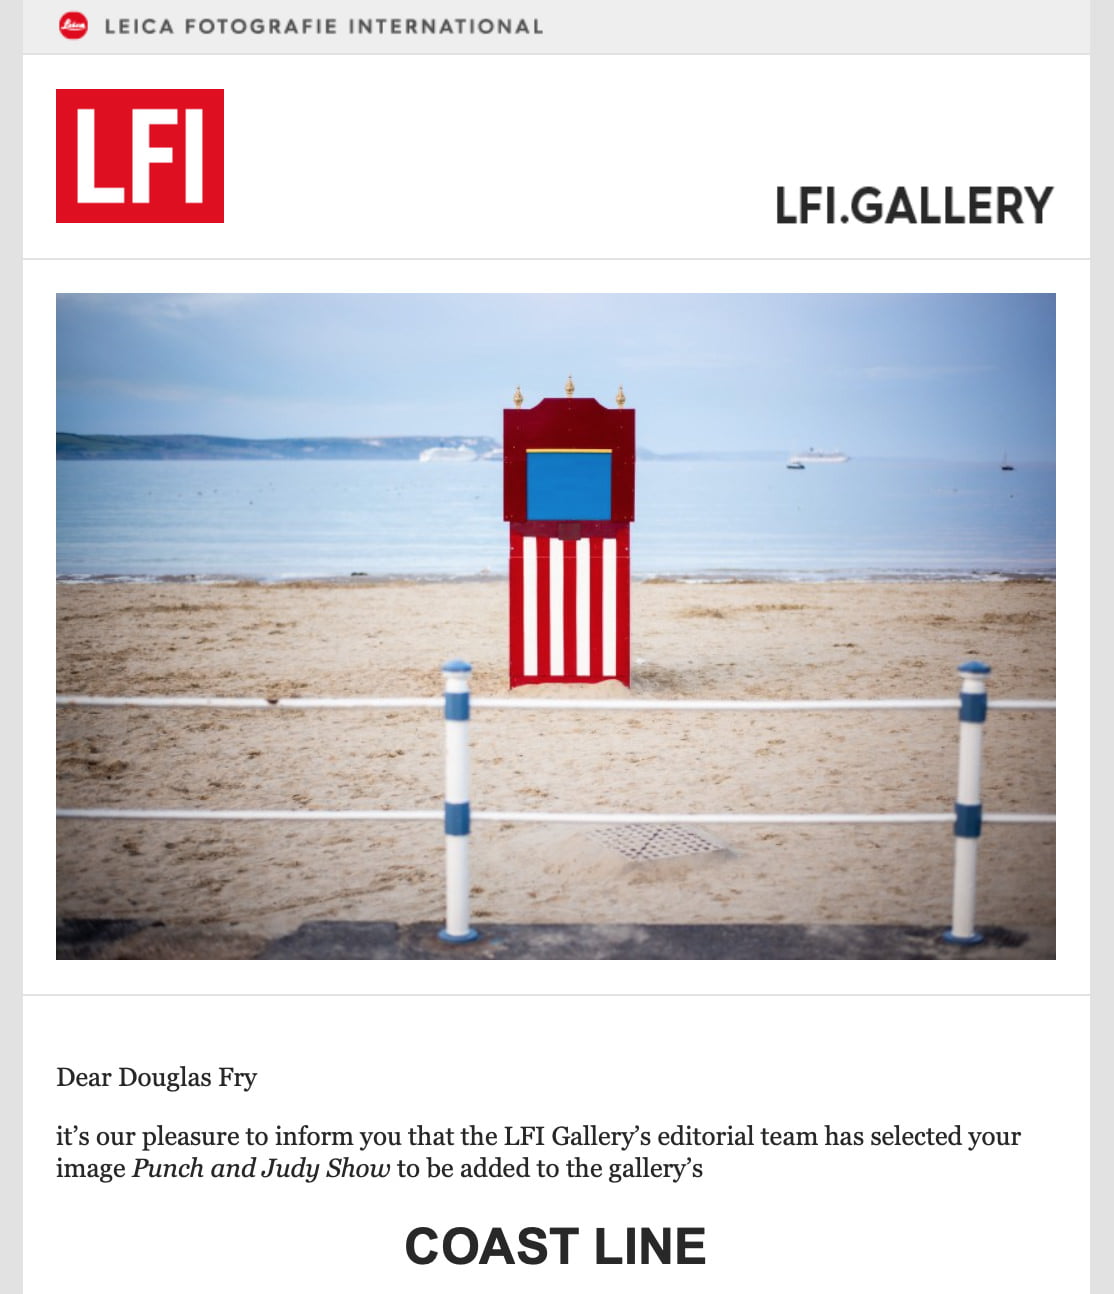 Photograph of beach featured on Leica Gallery